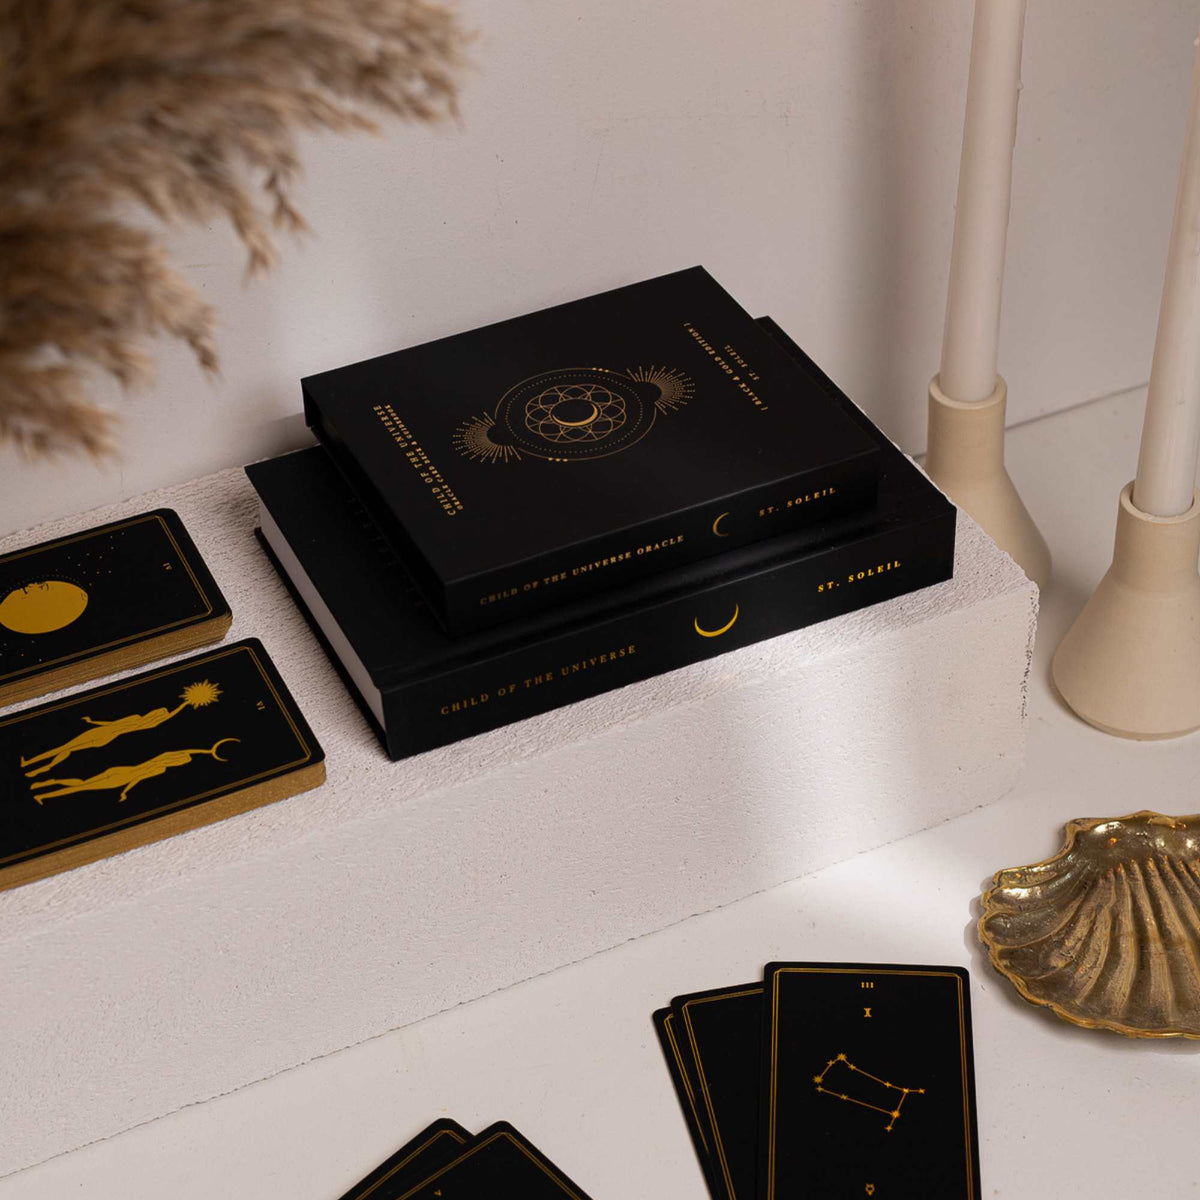 'Child Of The Universe' Gold Edition • Oracle Deck & Book by ST SOLEIL